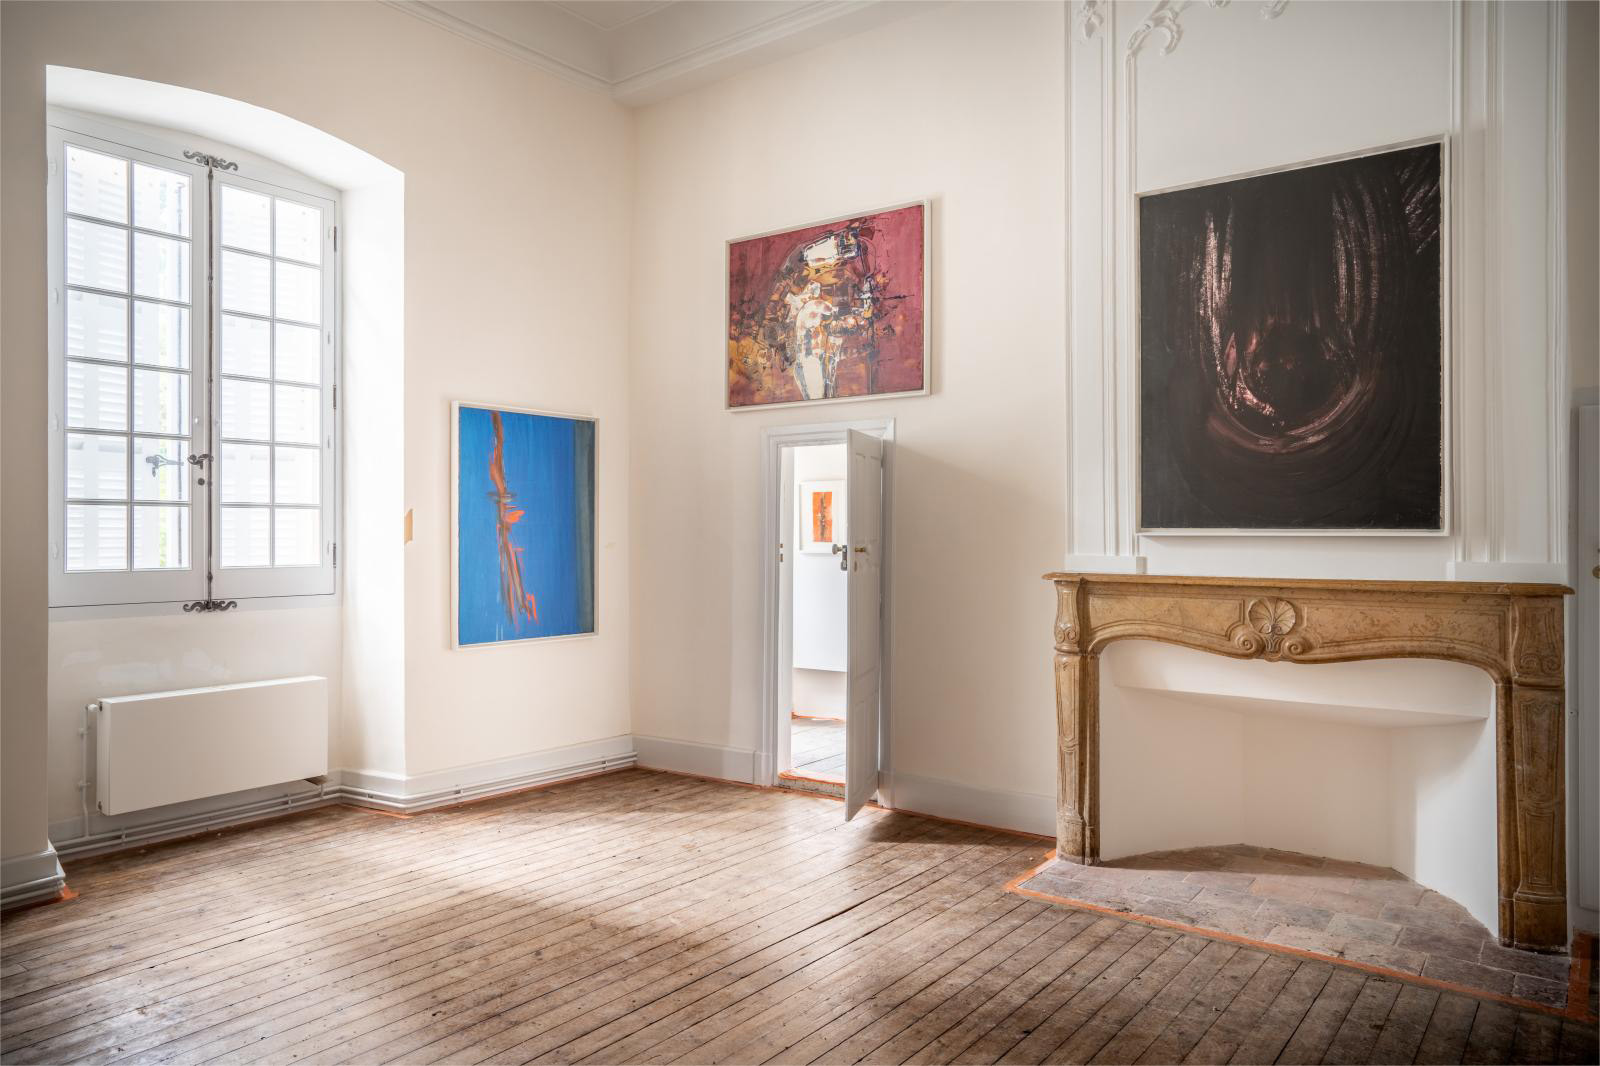 The "Gestures" room, with works by Jean Degottex, Claude Georges and René Duvillier.© Marc Allenbach - CMN